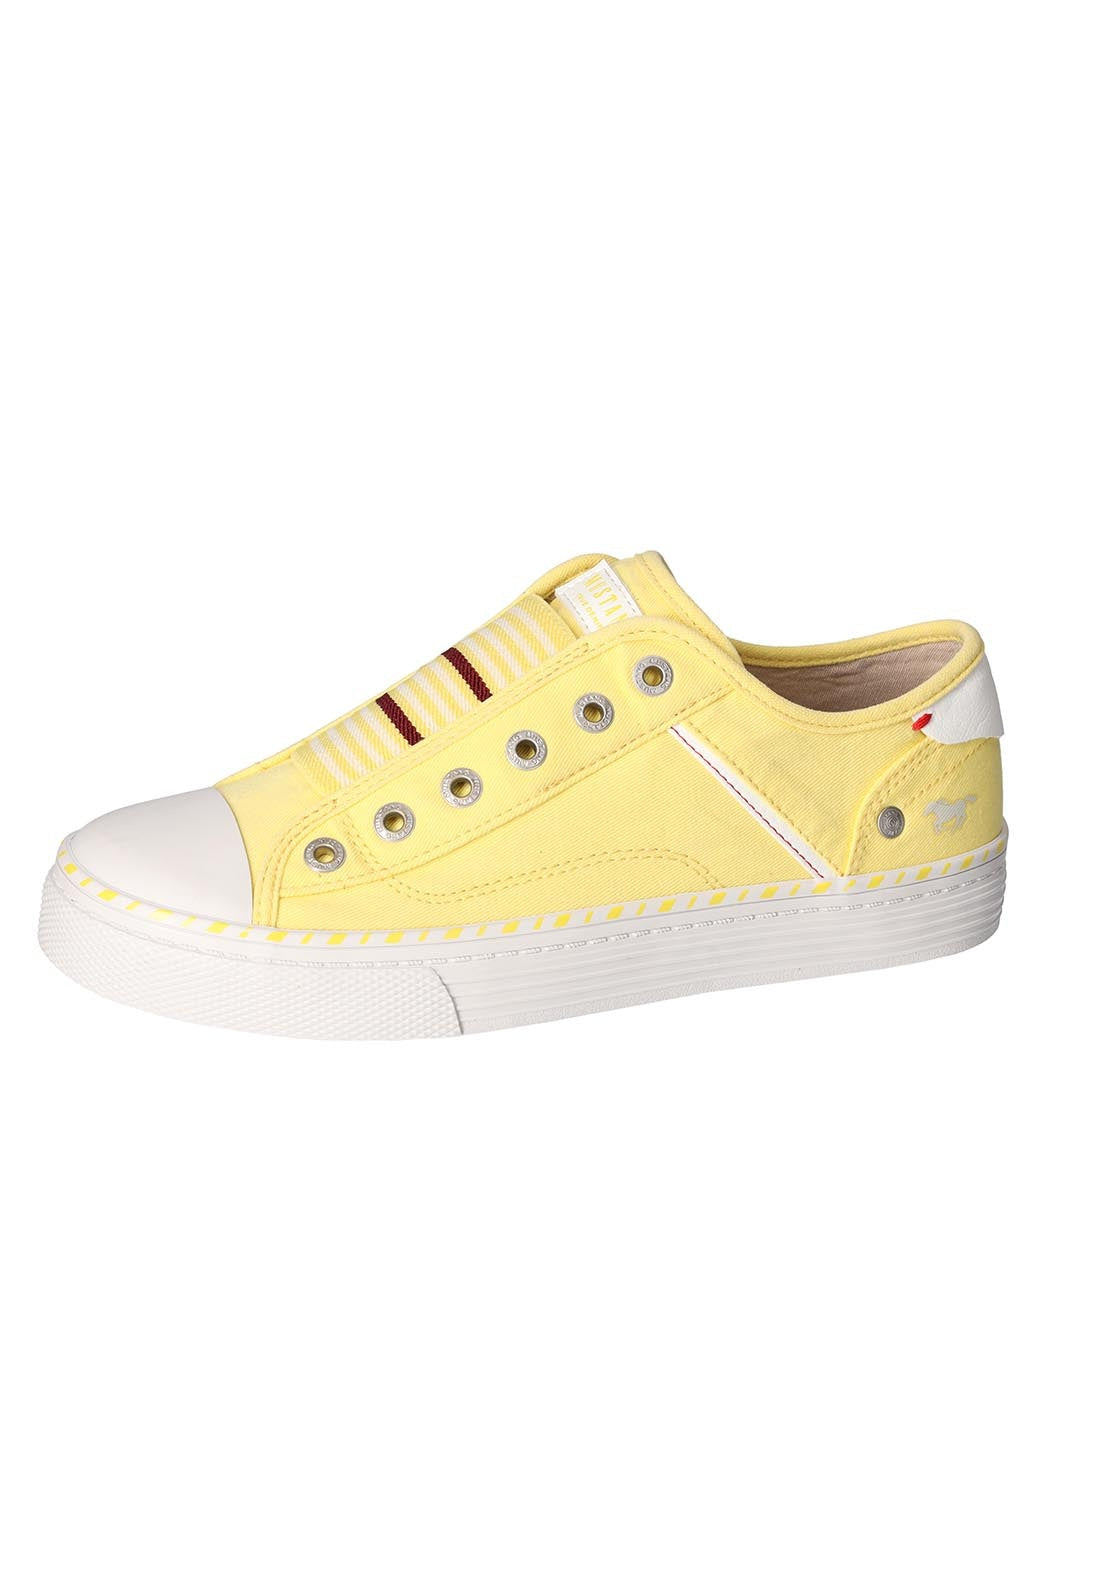 Mustang Slip-On Canvas Trainer - Yellow 1 Shaws Department Stores